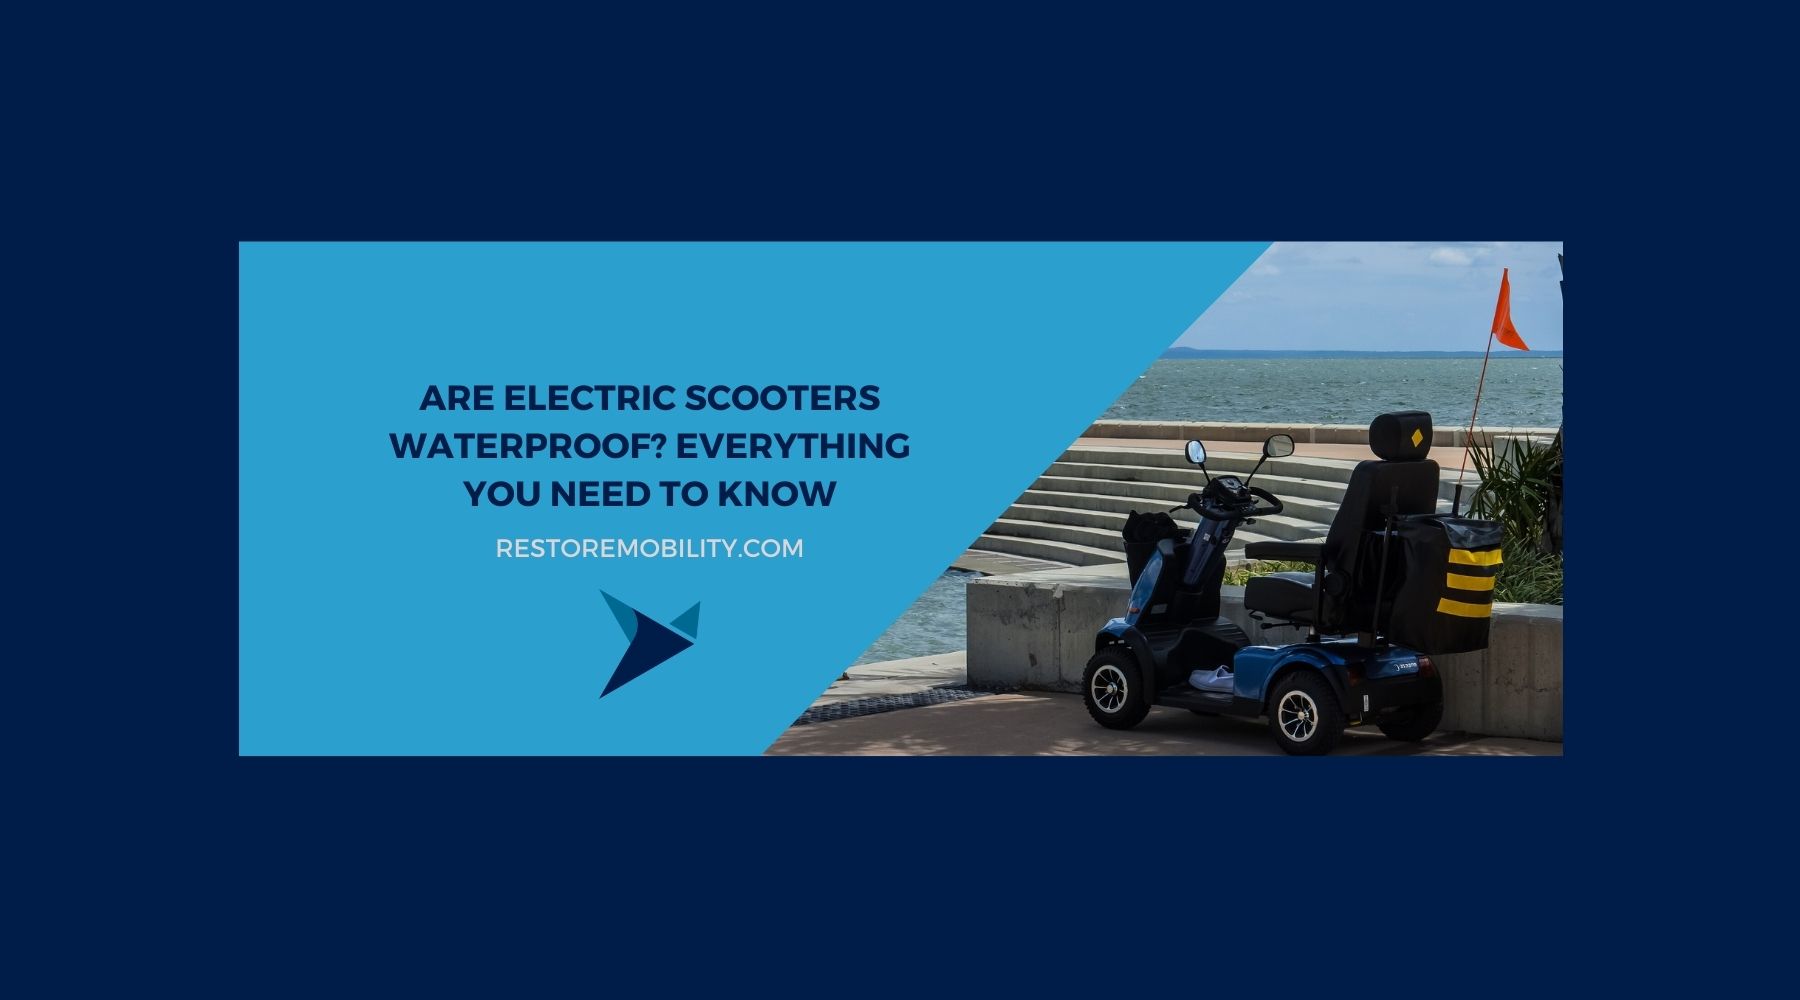 Are Electric Scooters Waterproof? Everything You Need to Know